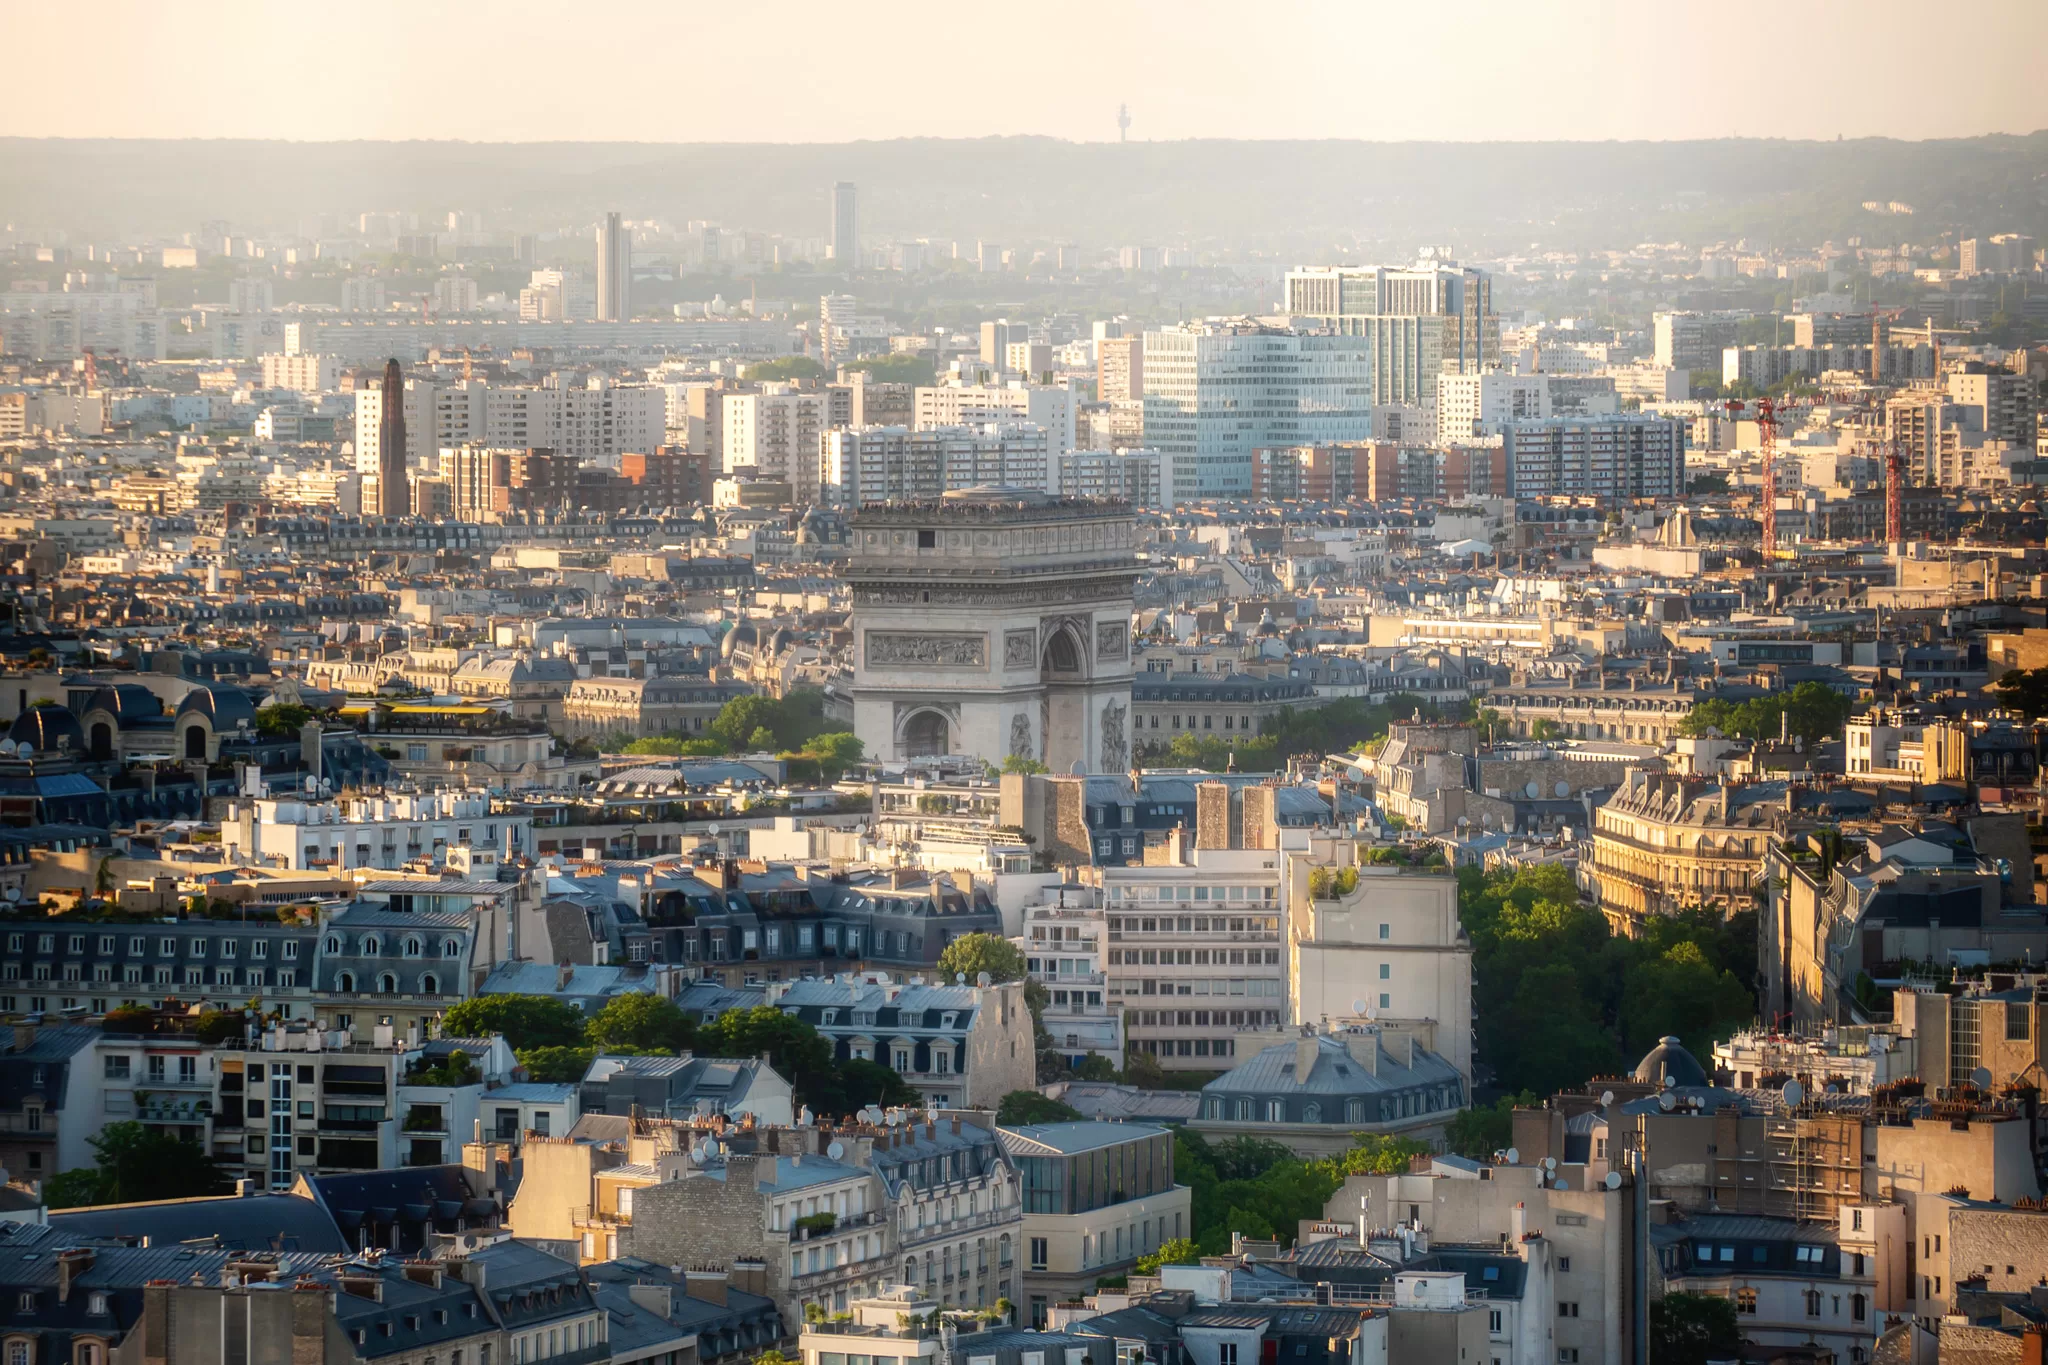 Photo of Arc de Triumph and Paris taken from the 2nd floor of the Eiffel Tower at sunset